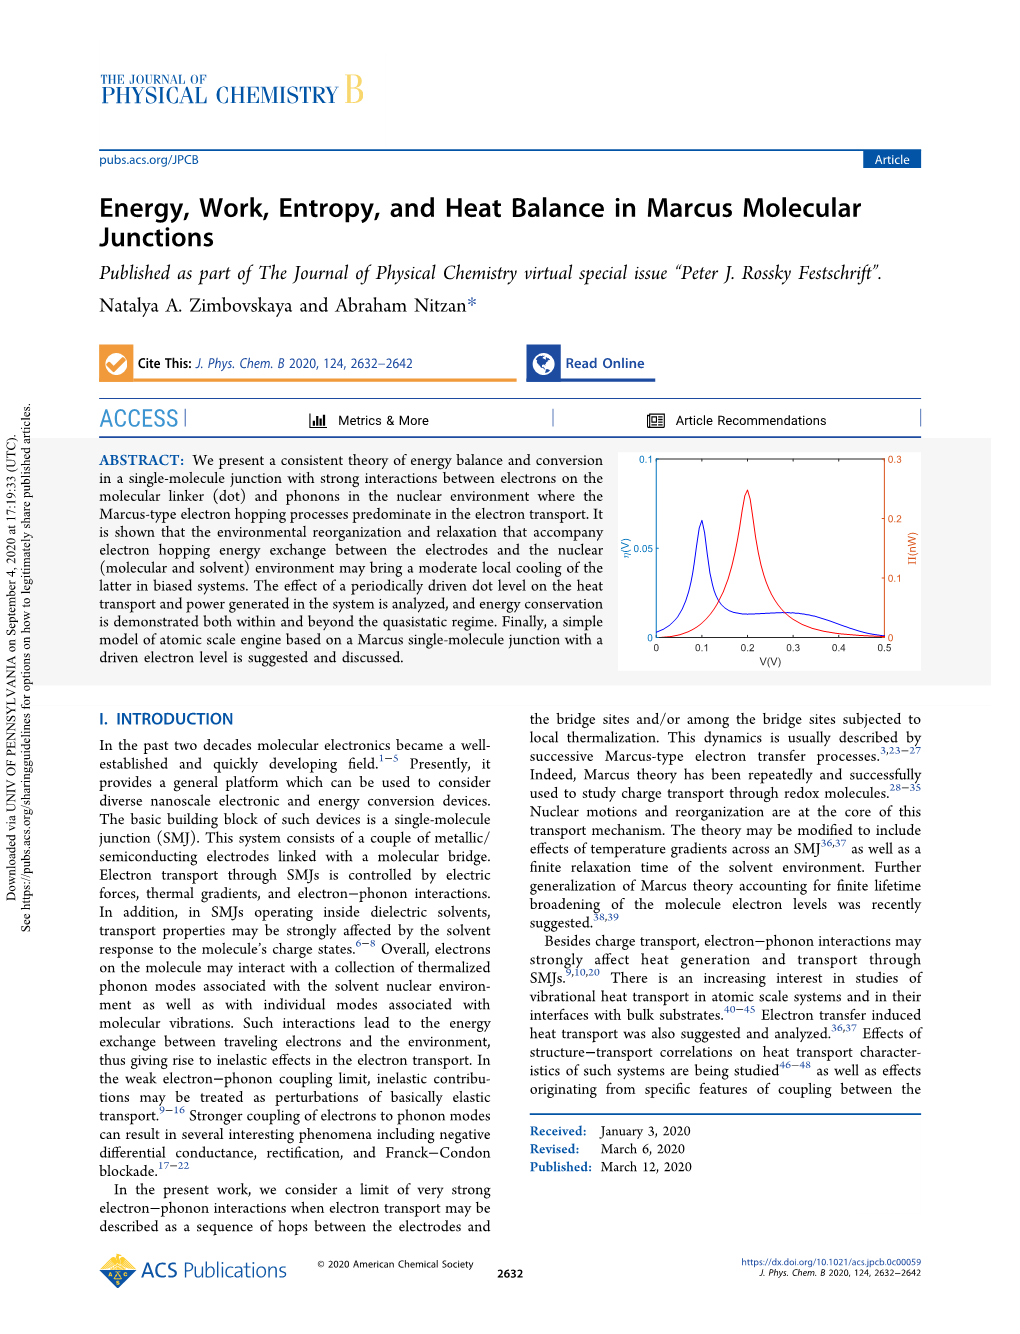 Energy, Work, Entropy, and Heat Balance in Marcus Molecular Junctions Published As Part of the Journal of Physical Chemistry Virtual Special Issue “Peter J